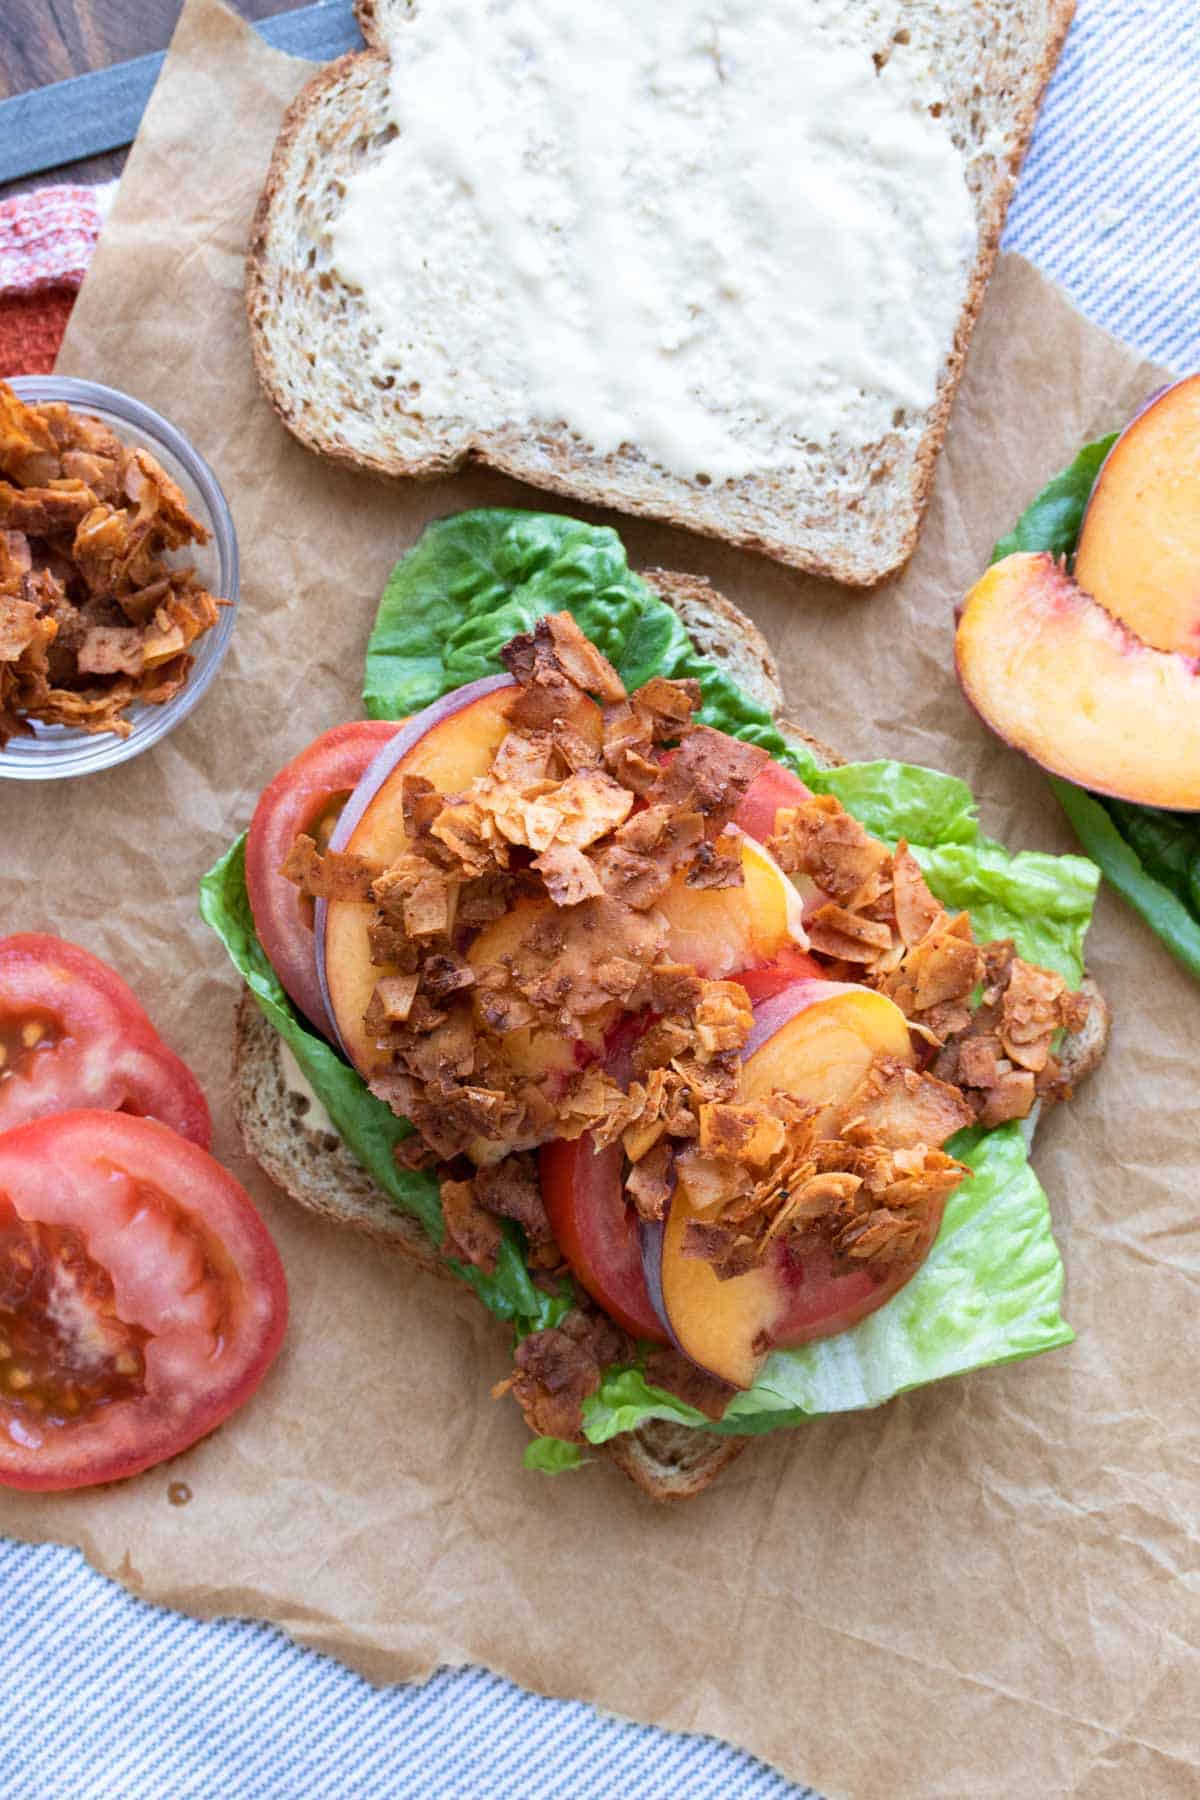 Top view of an open faced sandwich with lettuce, tomatoes, peaches and coconut bacon